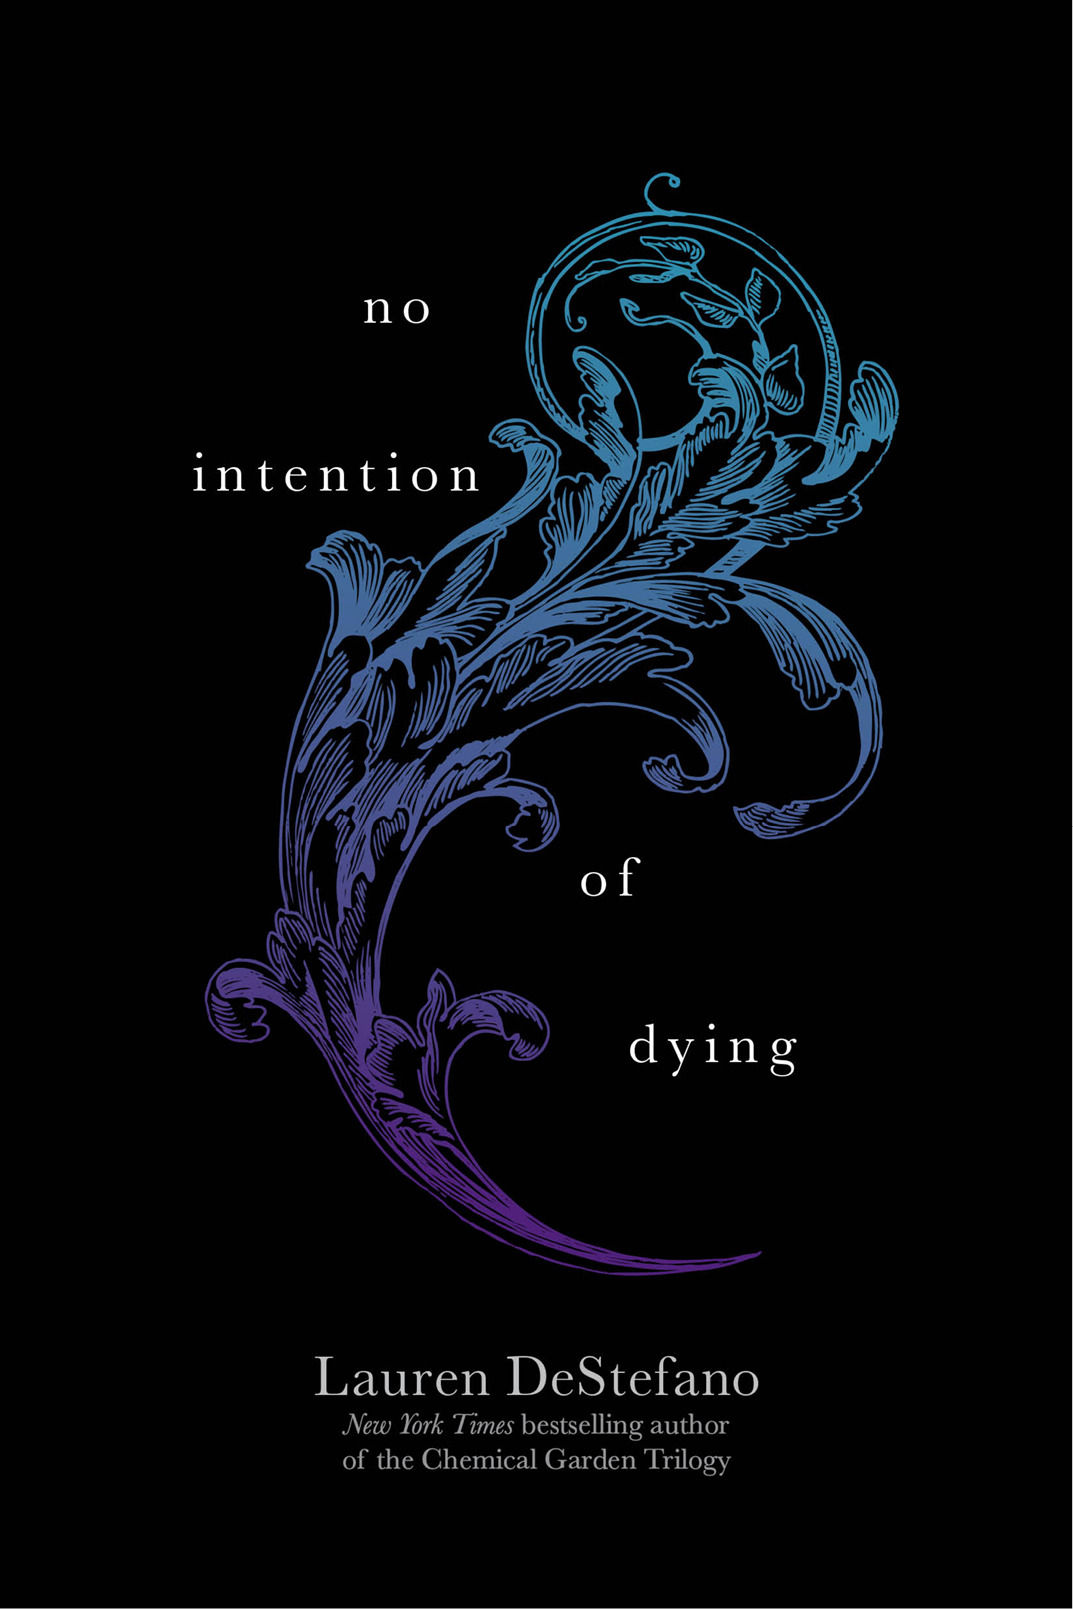 No Intention of Dying by Lauren DeStefano